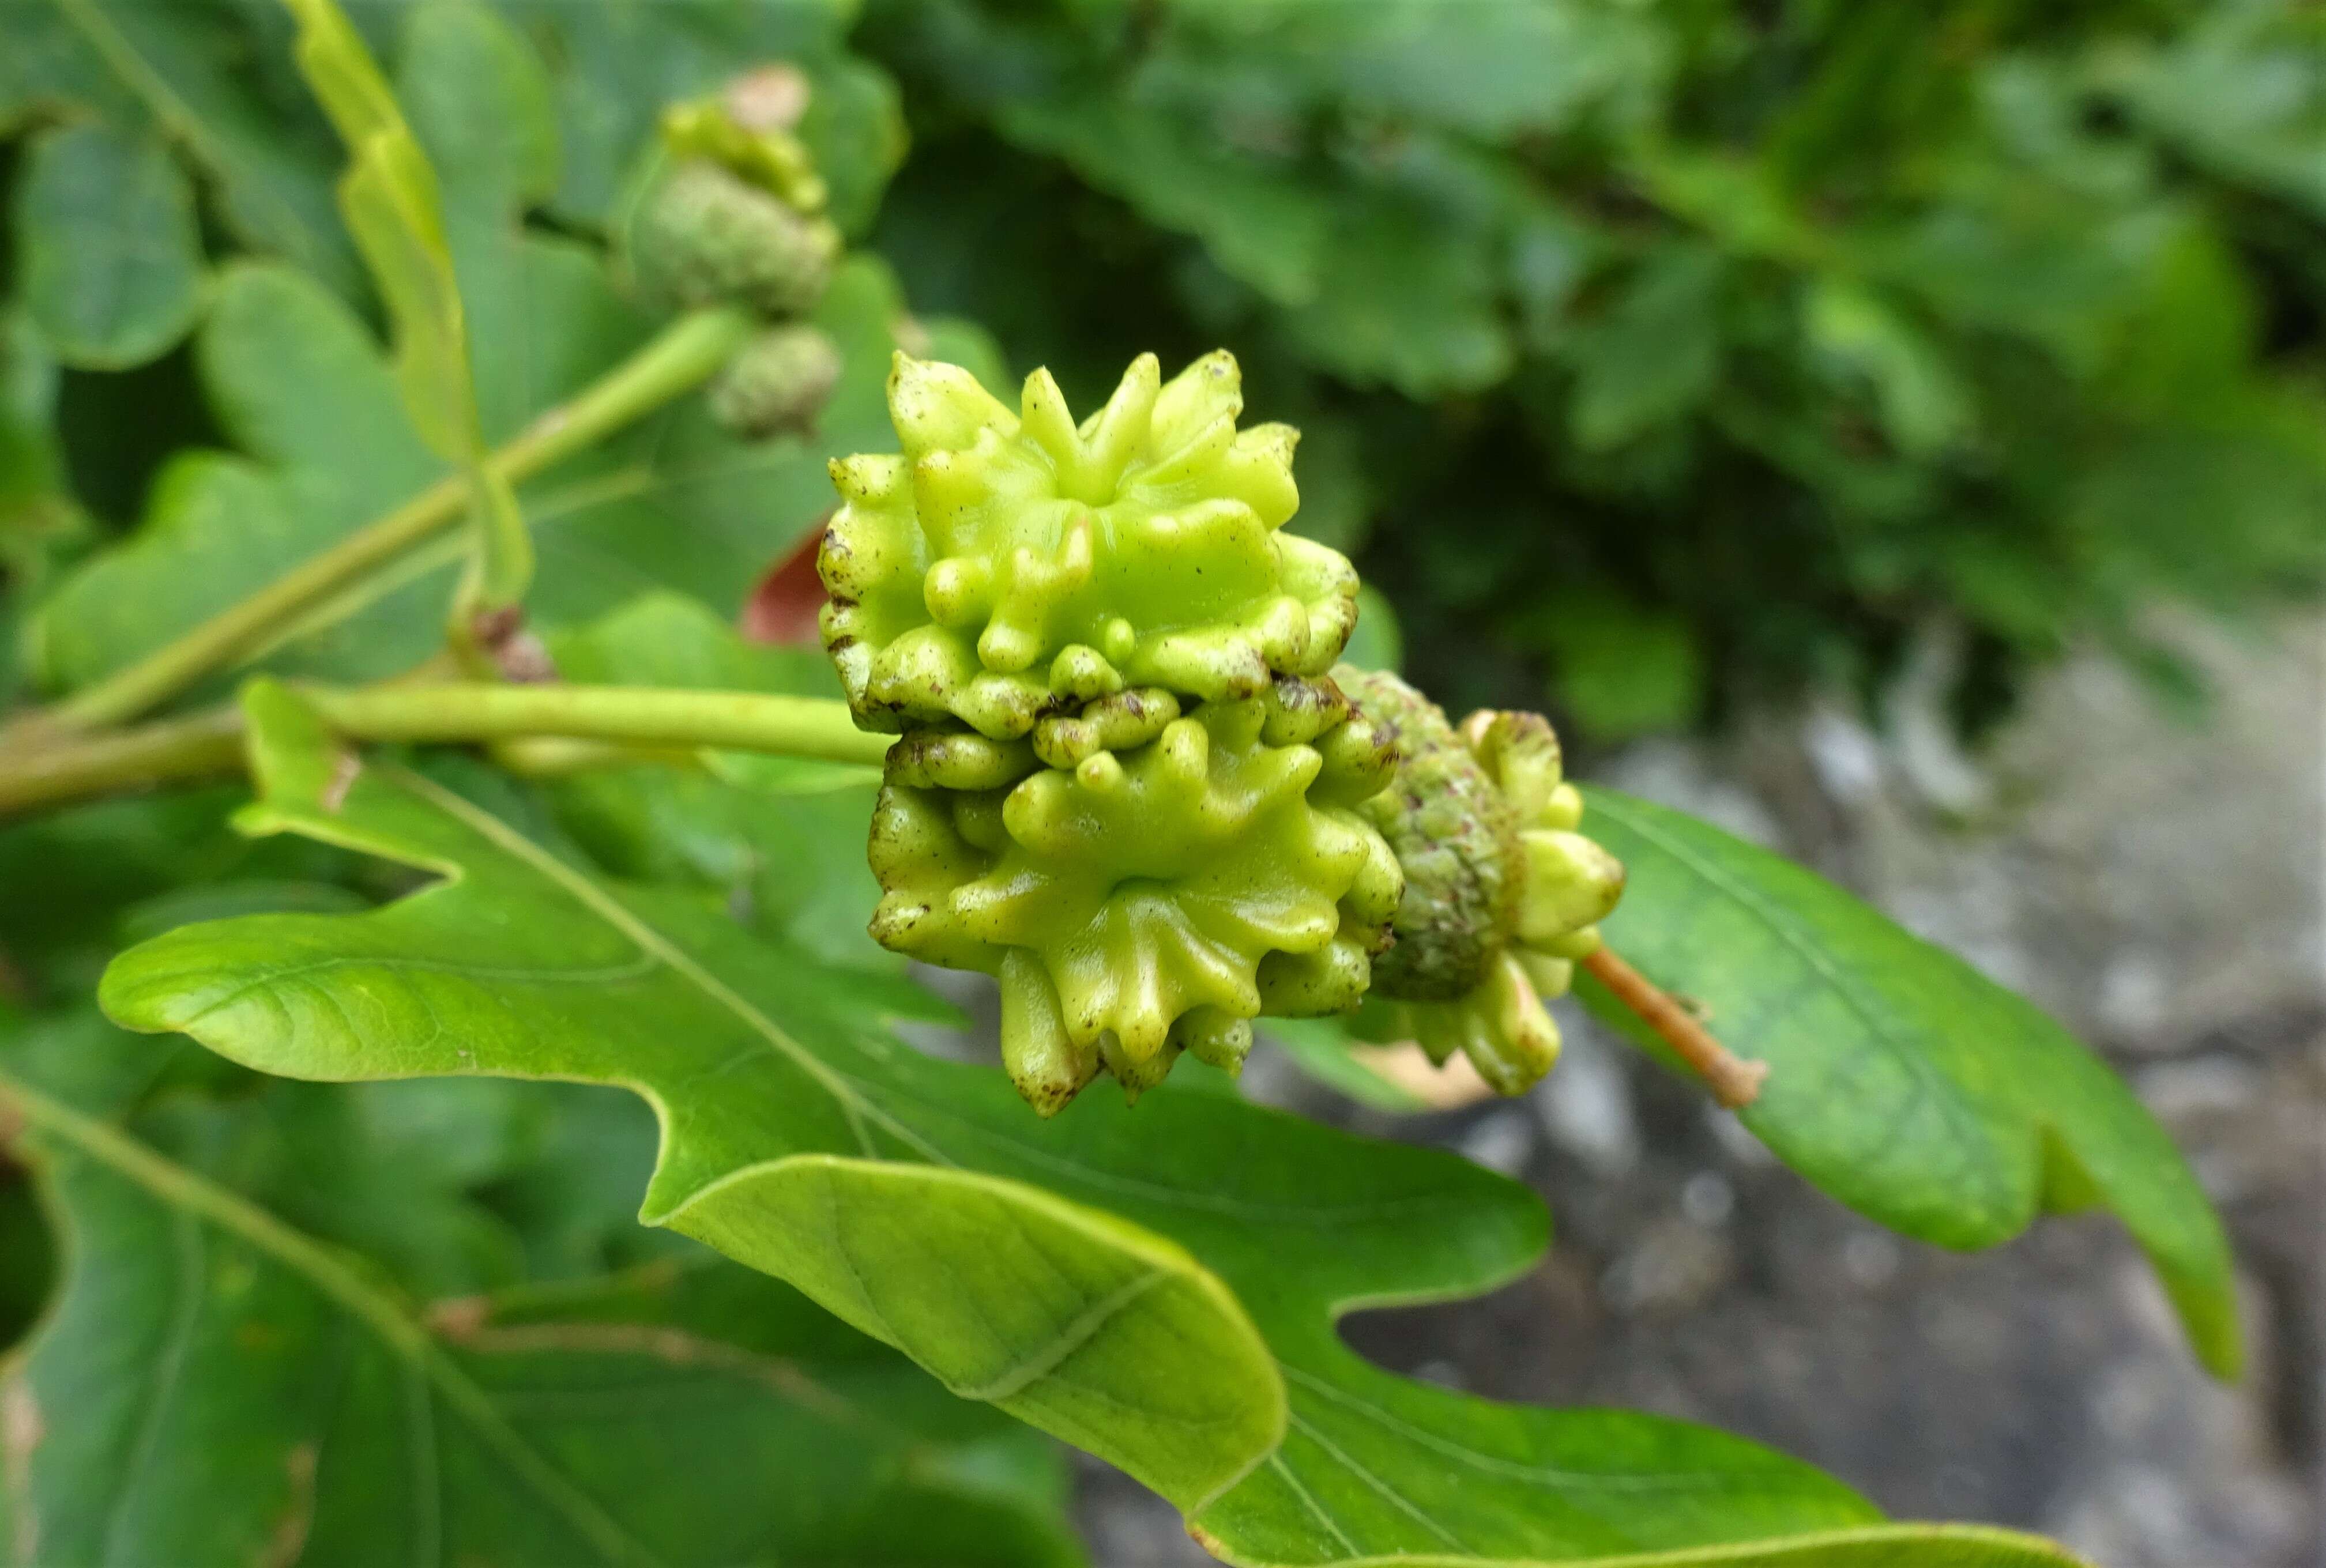 Image of Knopper gall wasp